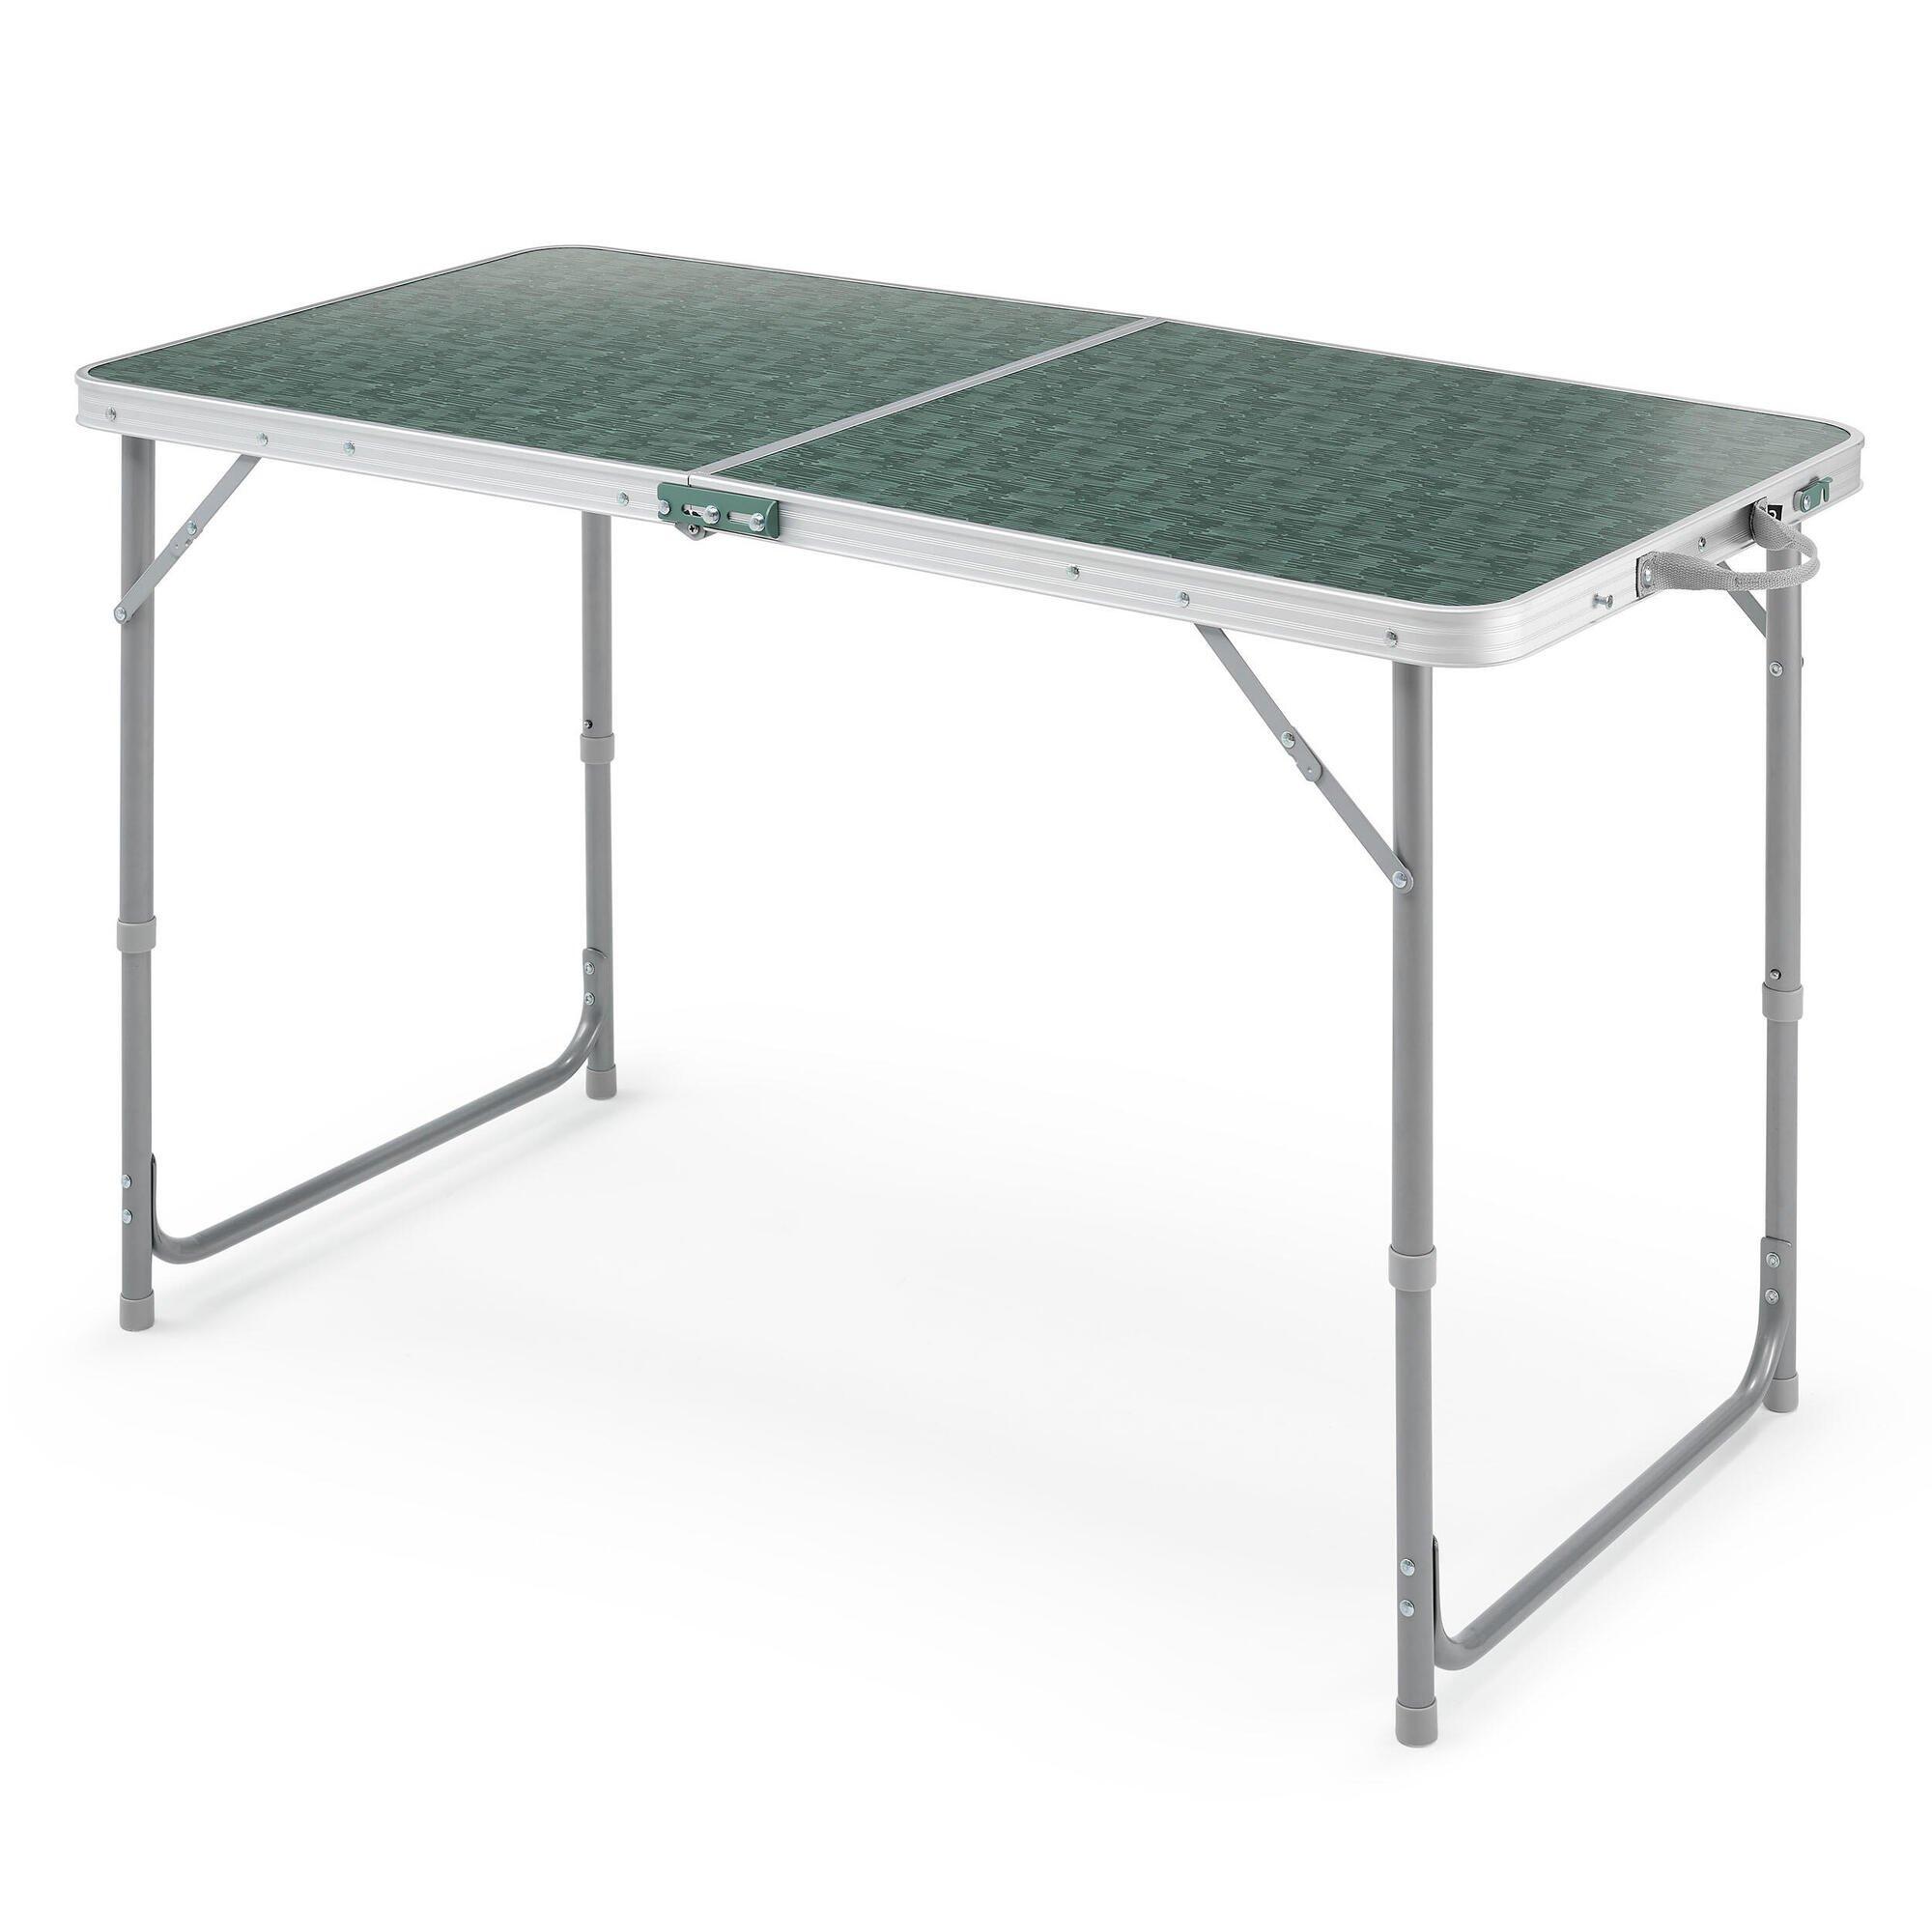 Folding Camping Table - 4 To 6 People